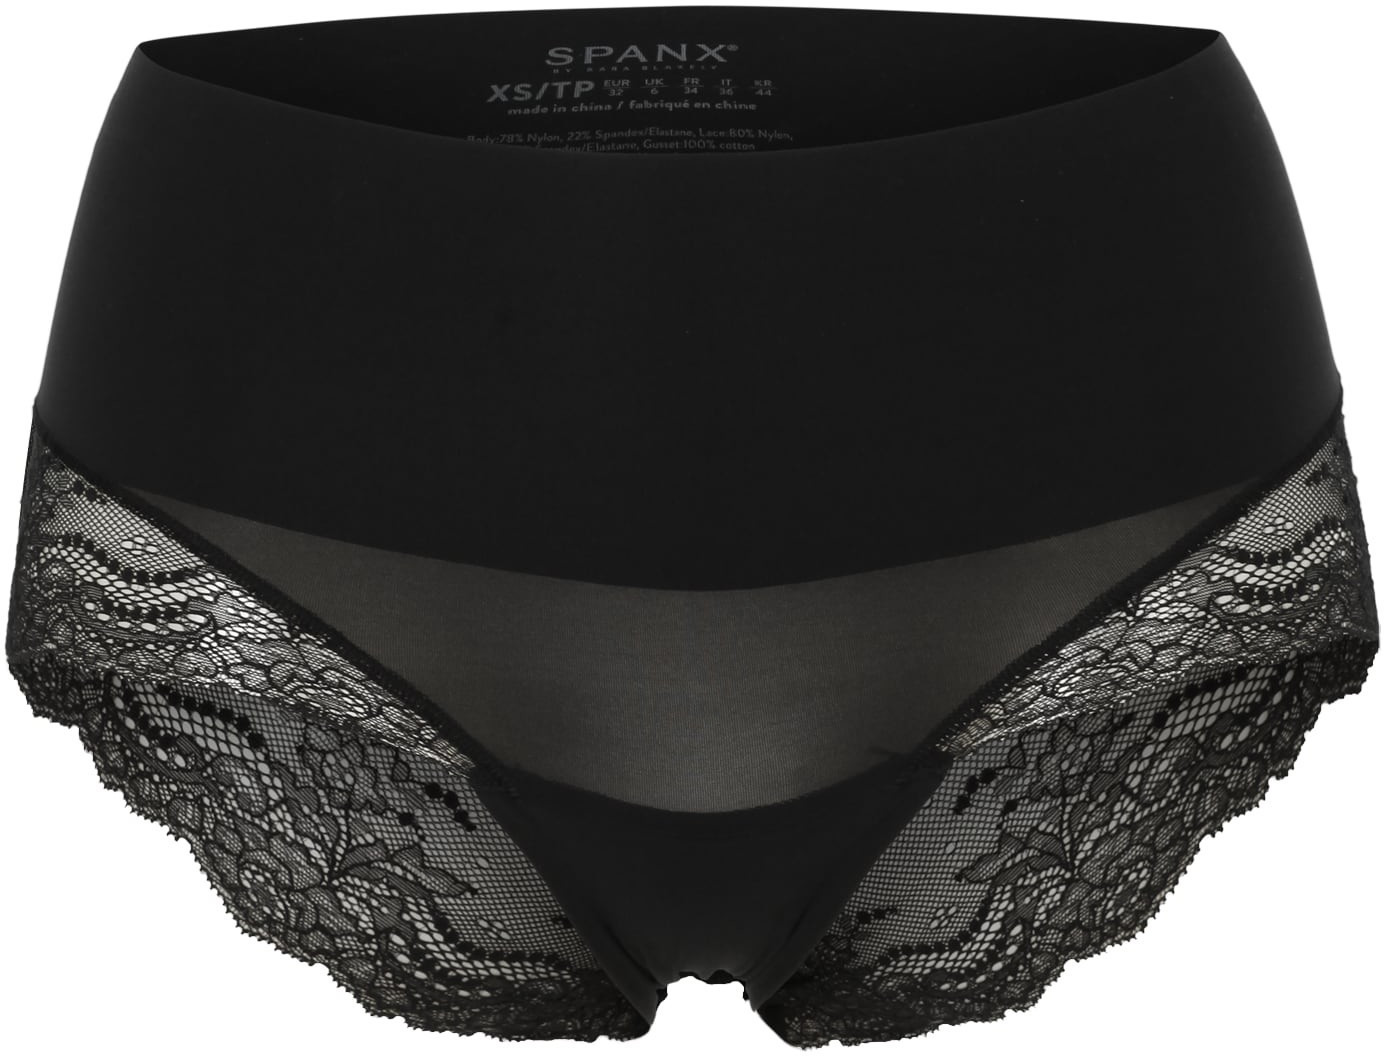 SPANX Women's Undie-Tectable Lace Hi-Hipster Panty